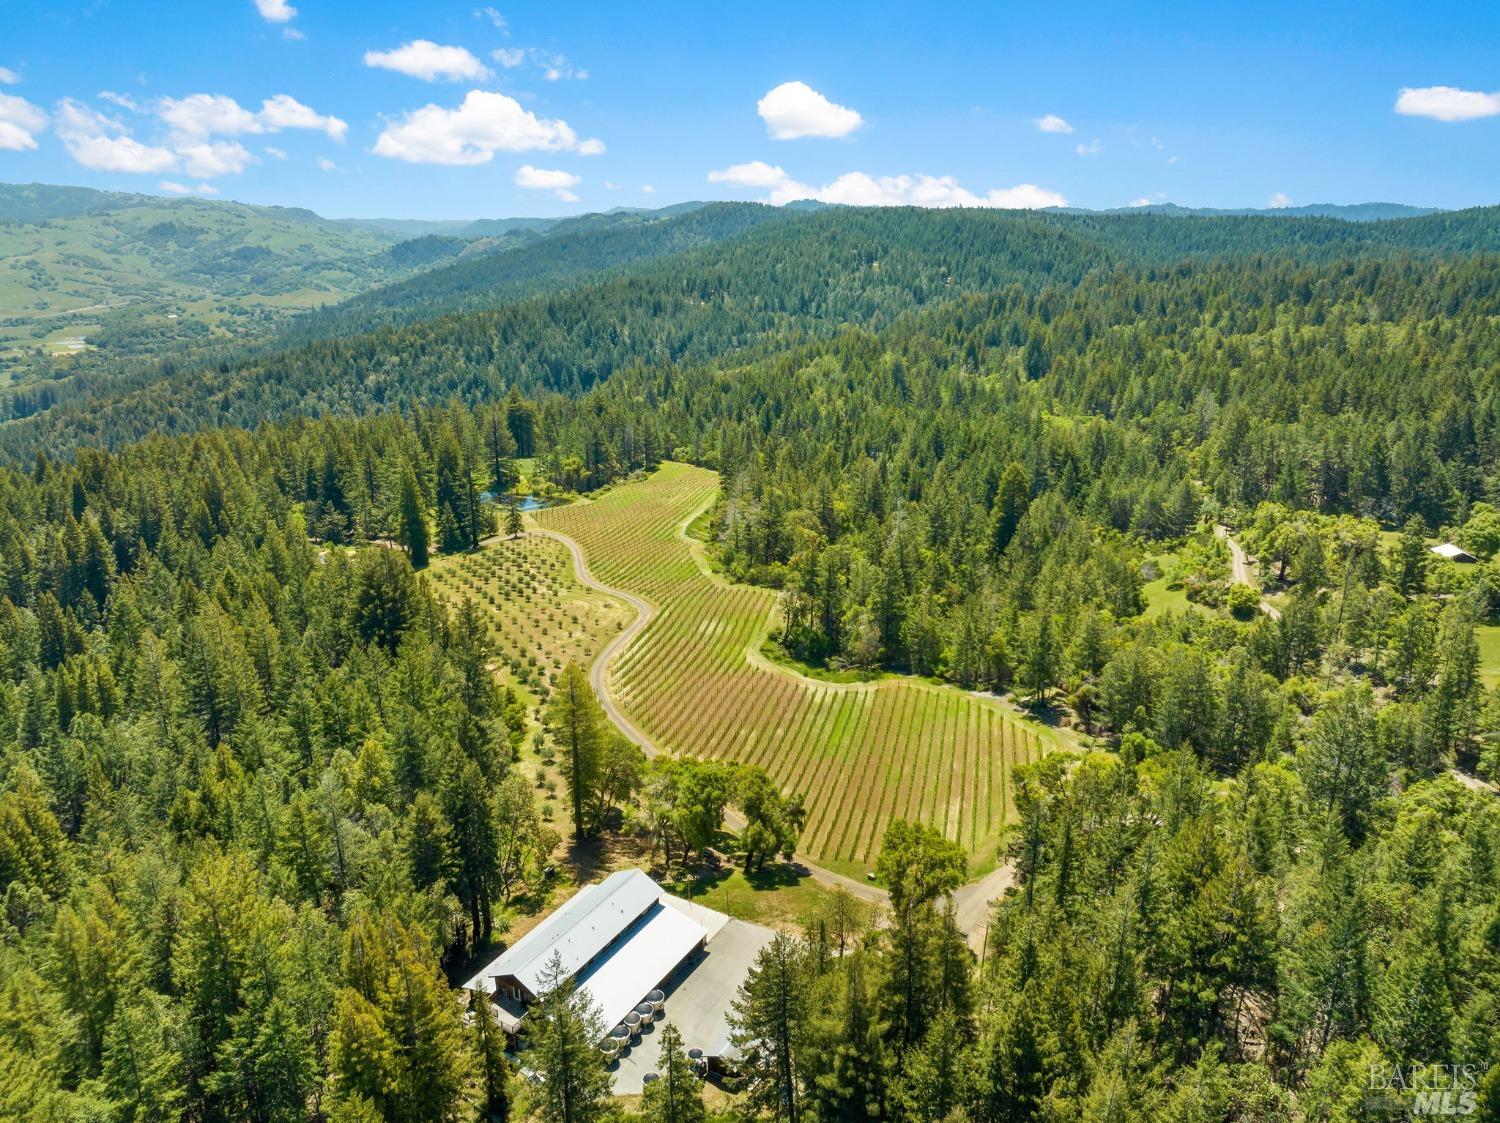 8851 Ravens Pike - quintessential Anderson Valley winery and vineyard property